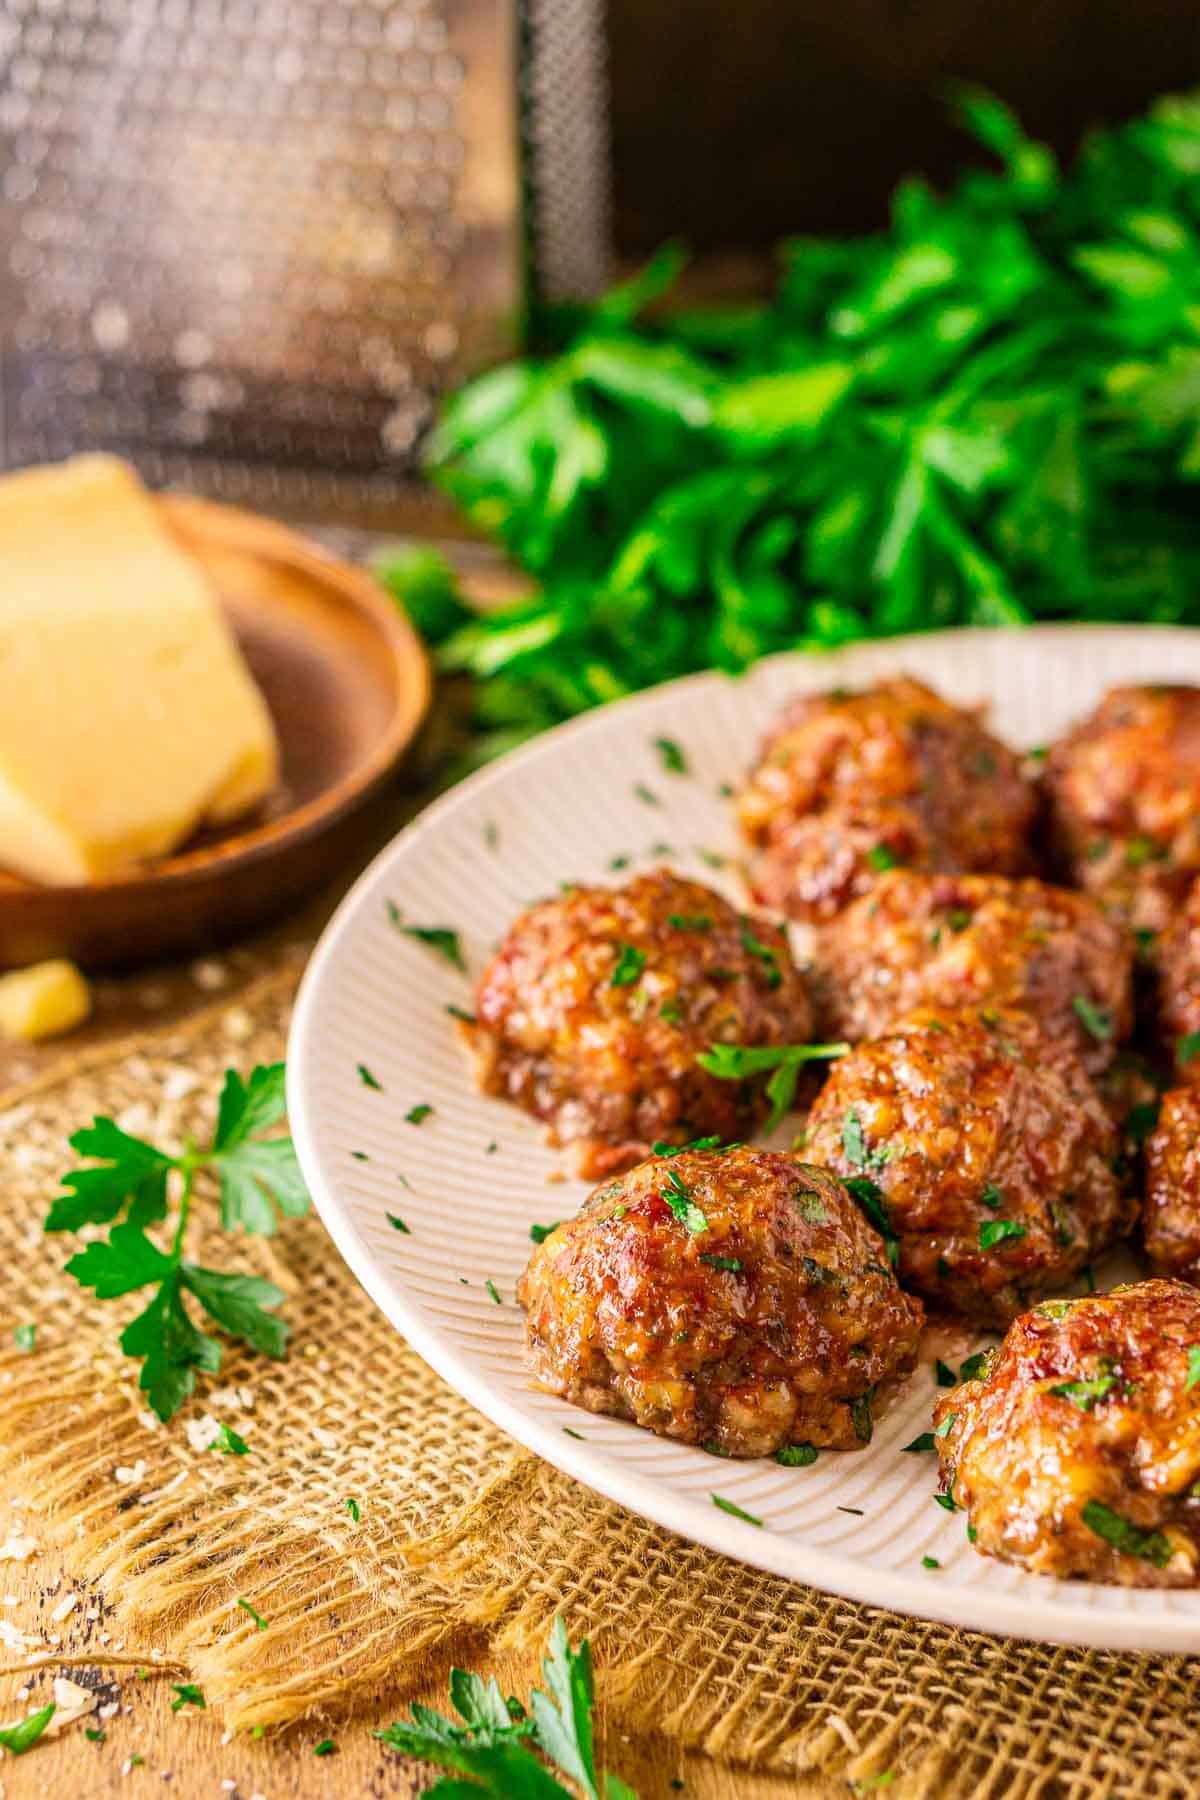 A close-up view of the smoked meatballs on a white plate with sprigs of parsley to the left and a wedge of Parmesan in the background with a cheese grater.